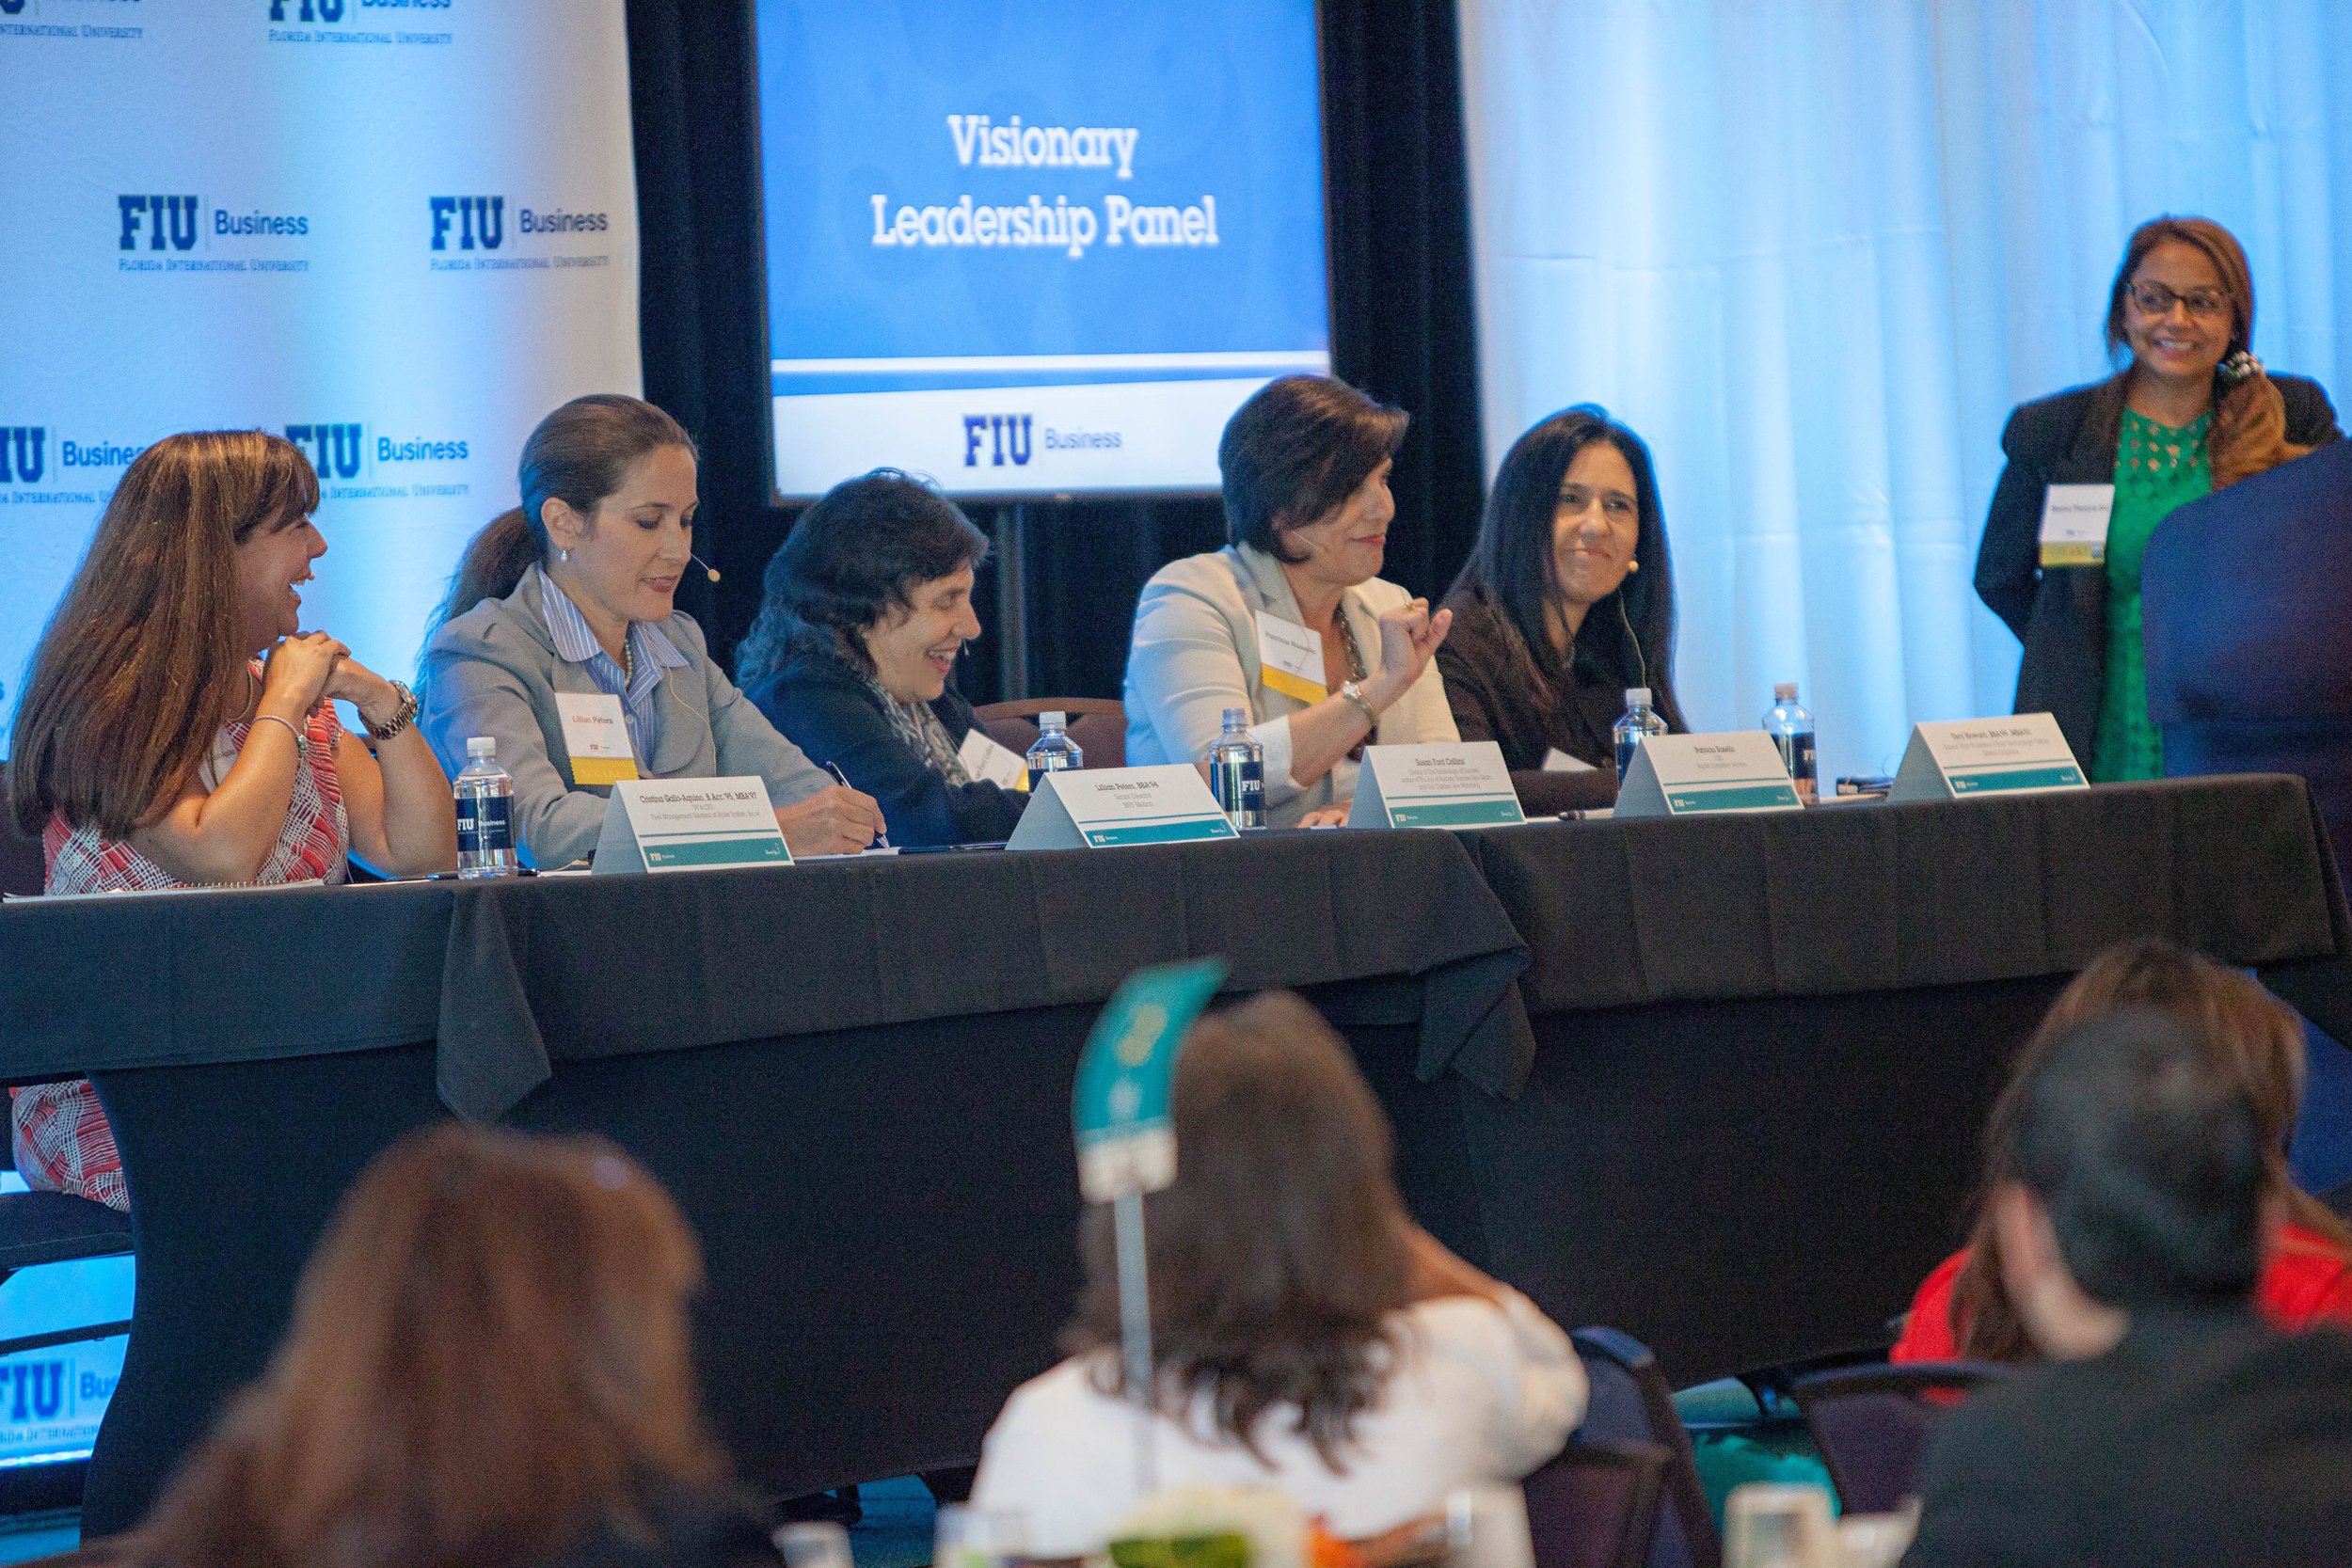 Copy of Copy of Visionary Leadership Panel FIU PowerUp Leadership Conference 2016